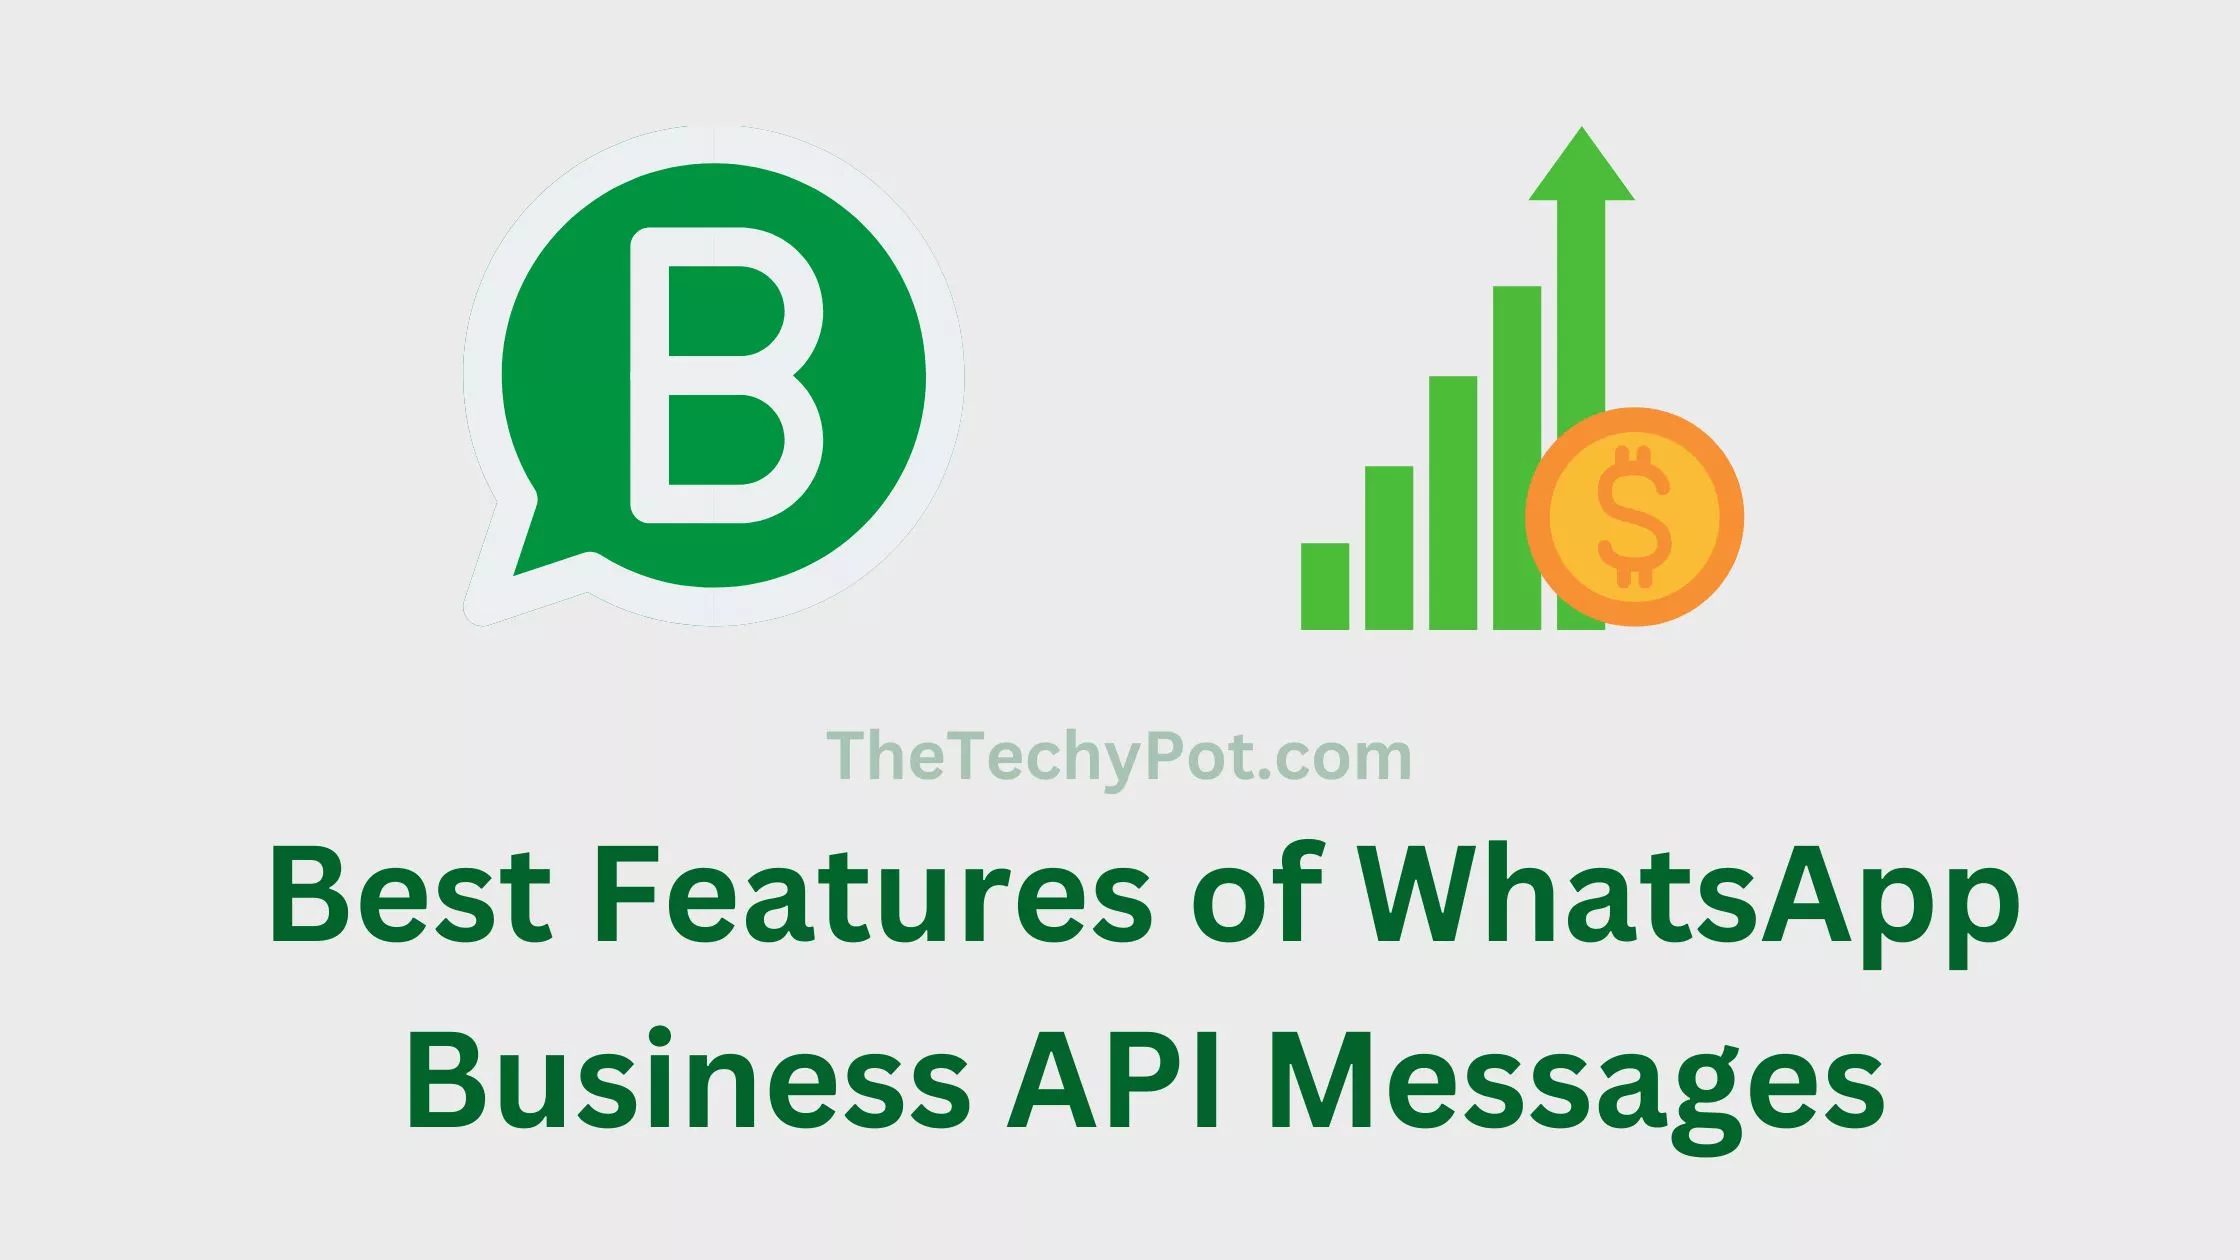 WhatsApp Business API Message Features